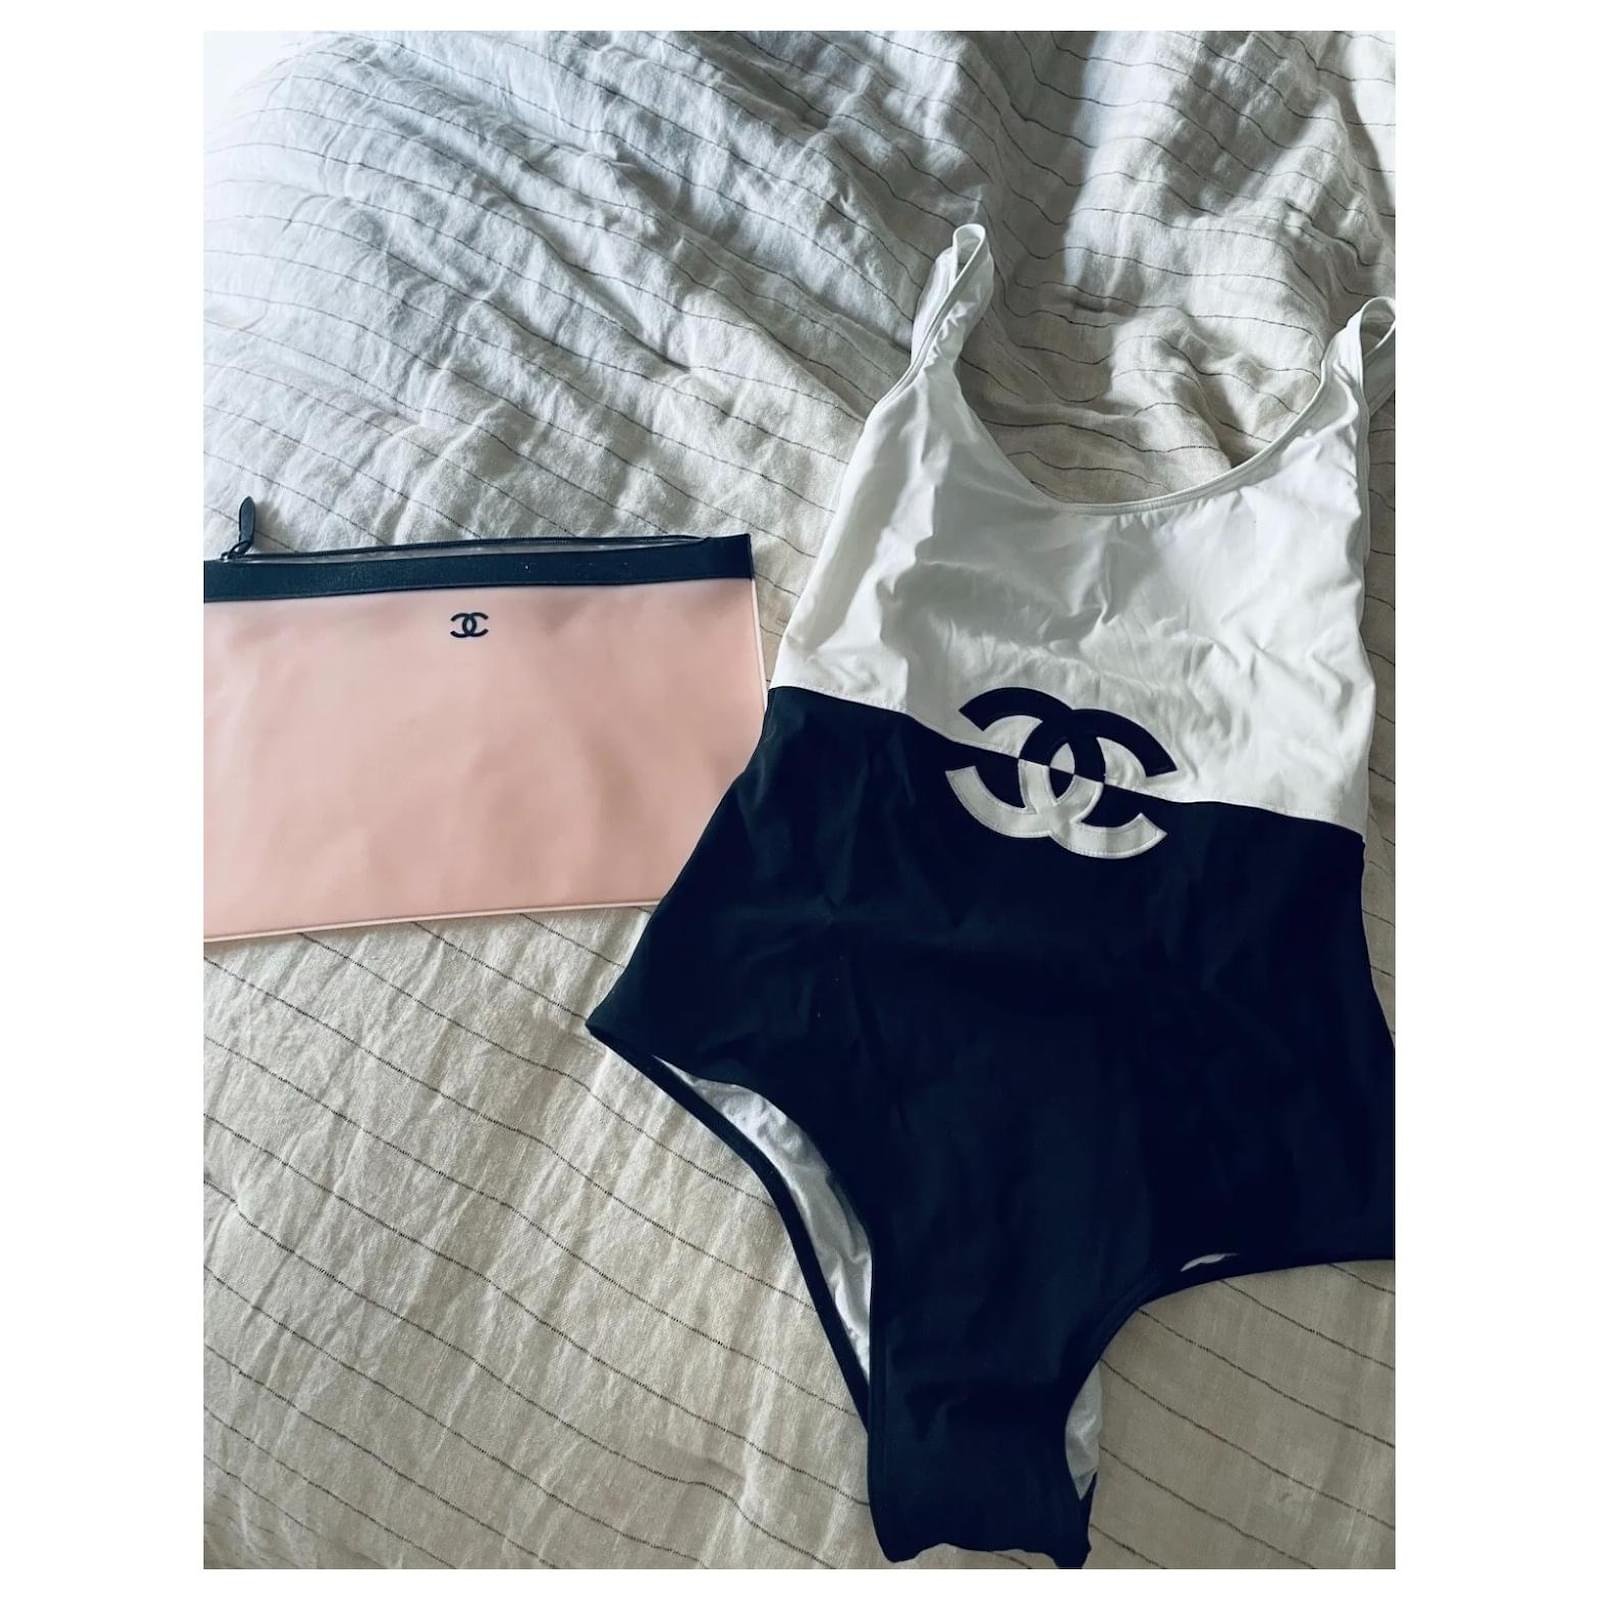 CHANEL One Pieces for Women - Poshmark